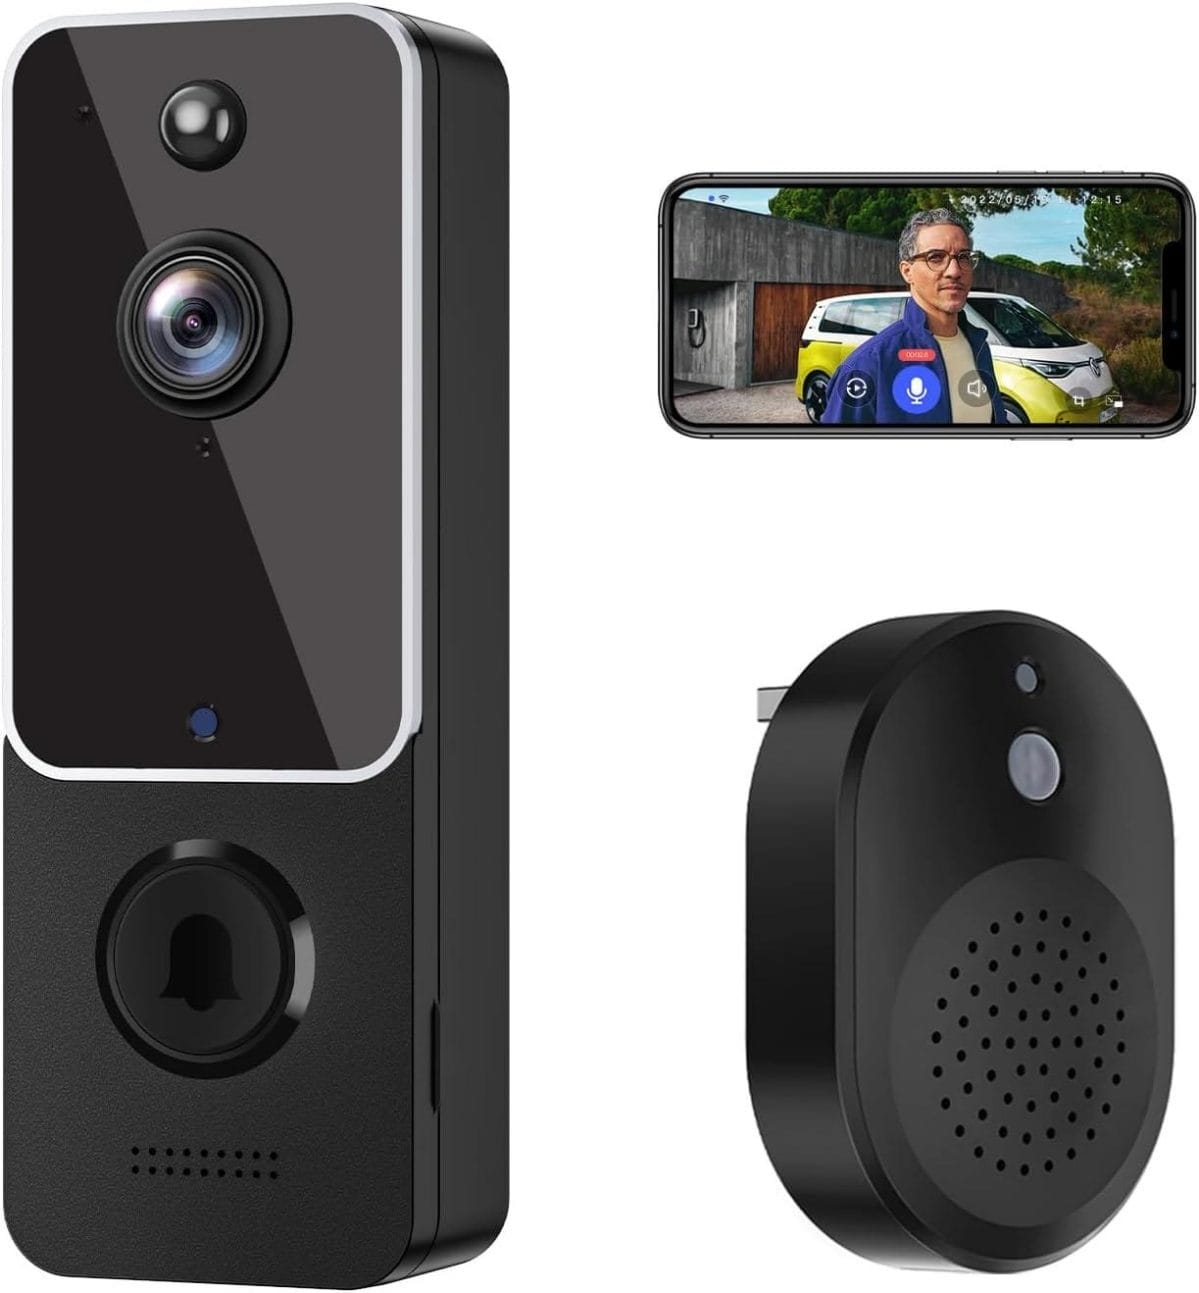 Tuck SHARKPOP Doorbell Camera Wireless, WiFi Video Doorbell with Free Ring Chime, Indoor/Outdoor Surveillance Human Detection, 2-Way Audio, Night Vision, Cloud Storage, Battery Powered, Live View